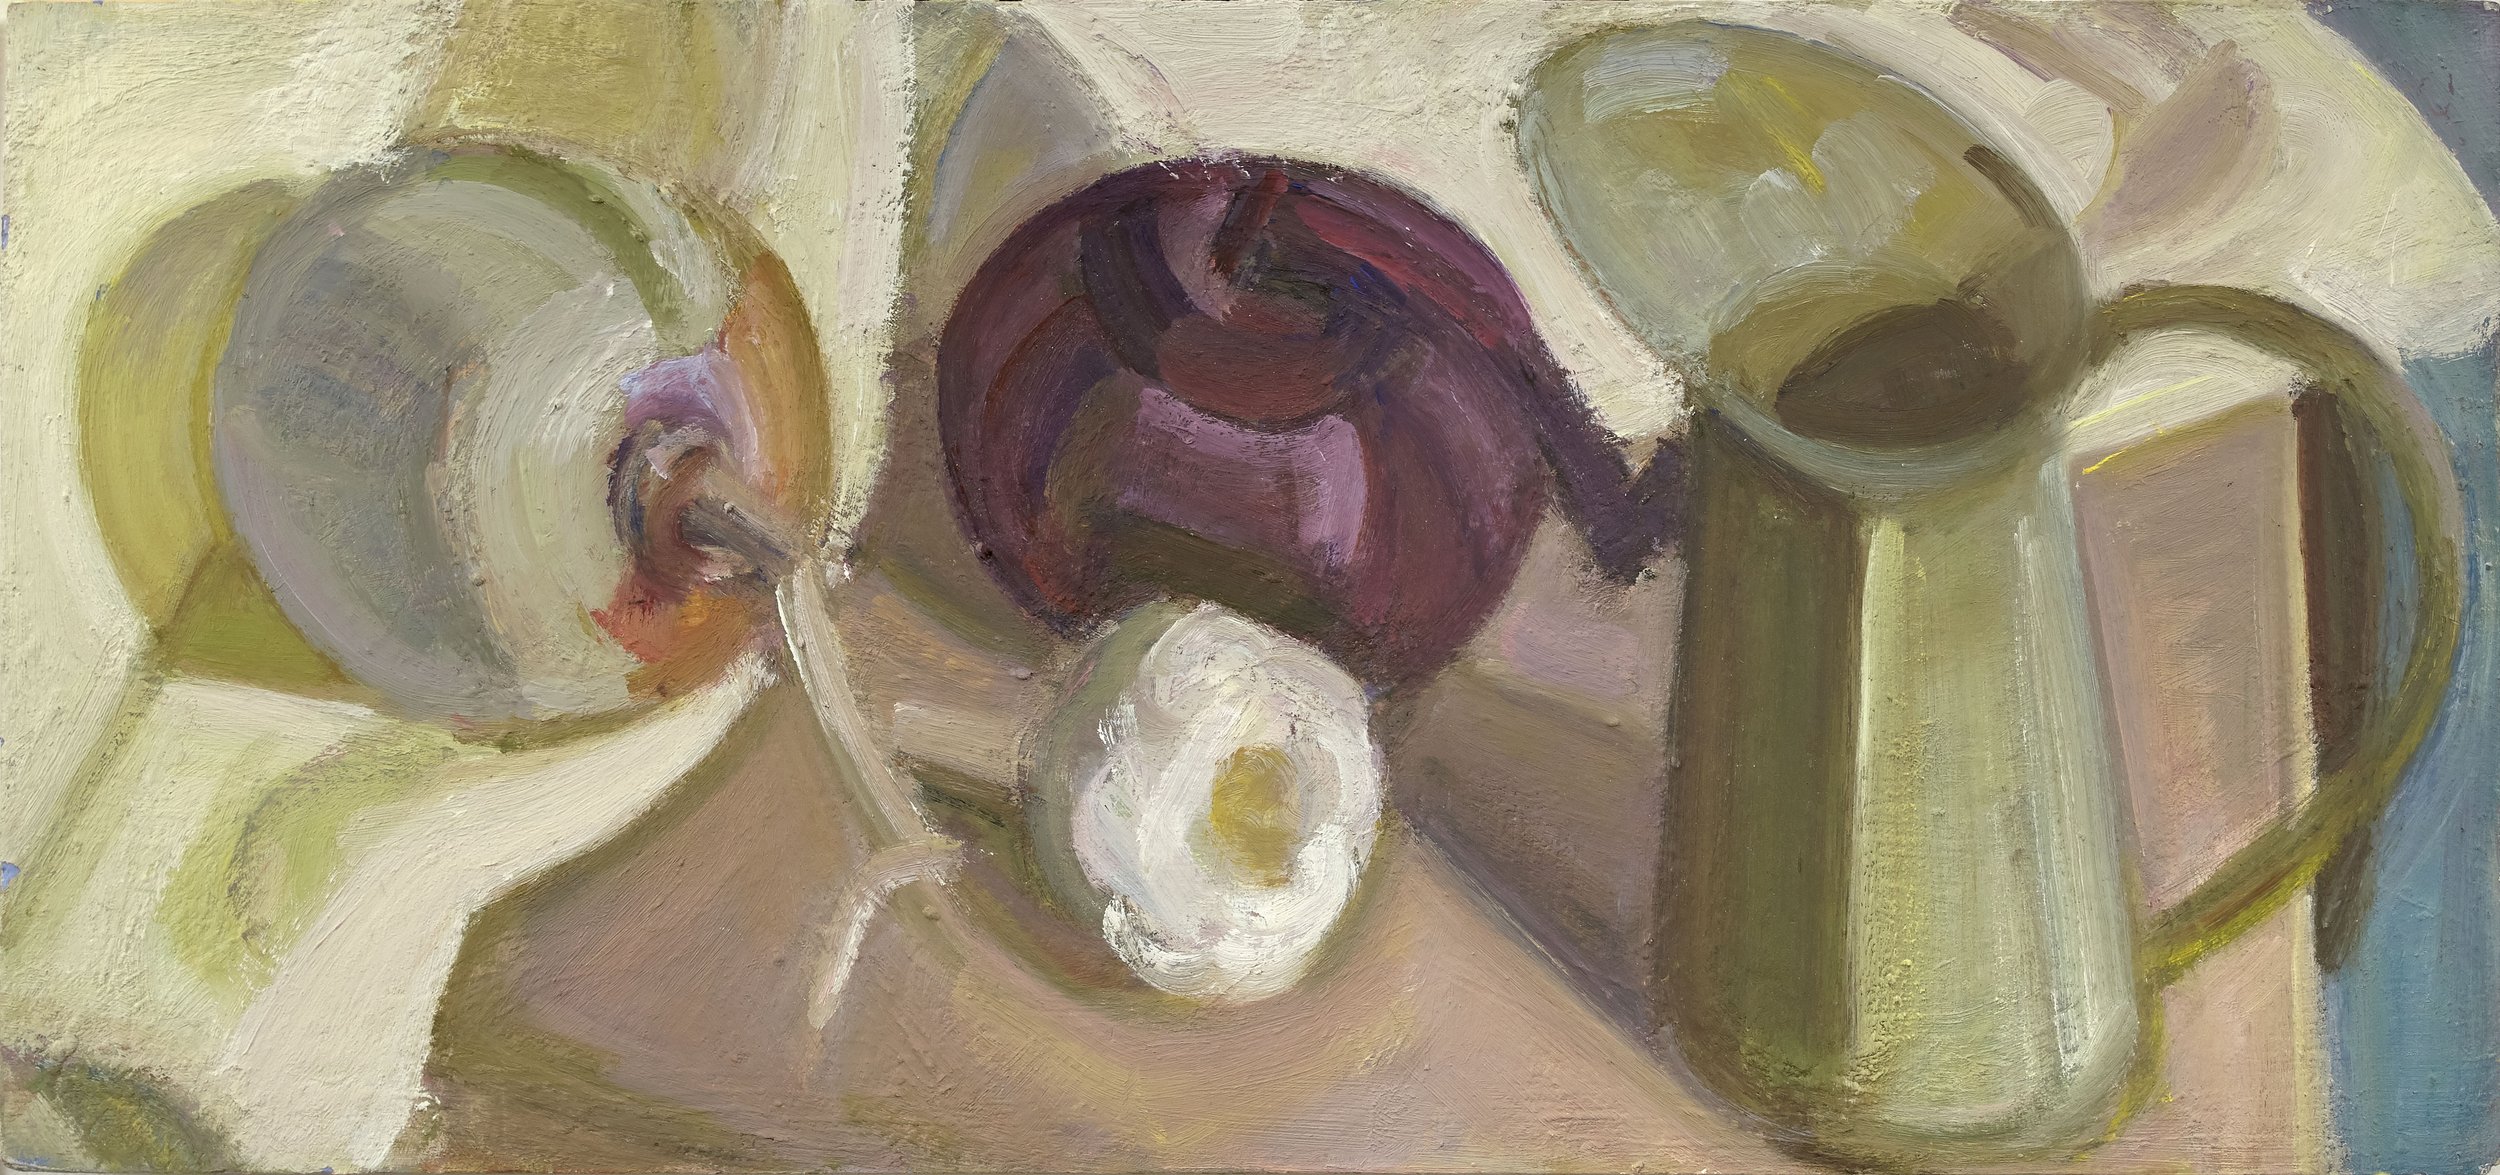   Pitcher, Red Onion, Yellow Onion, Garlic , 2018, oil/panel, 7 x 15 in. (Private collection) 